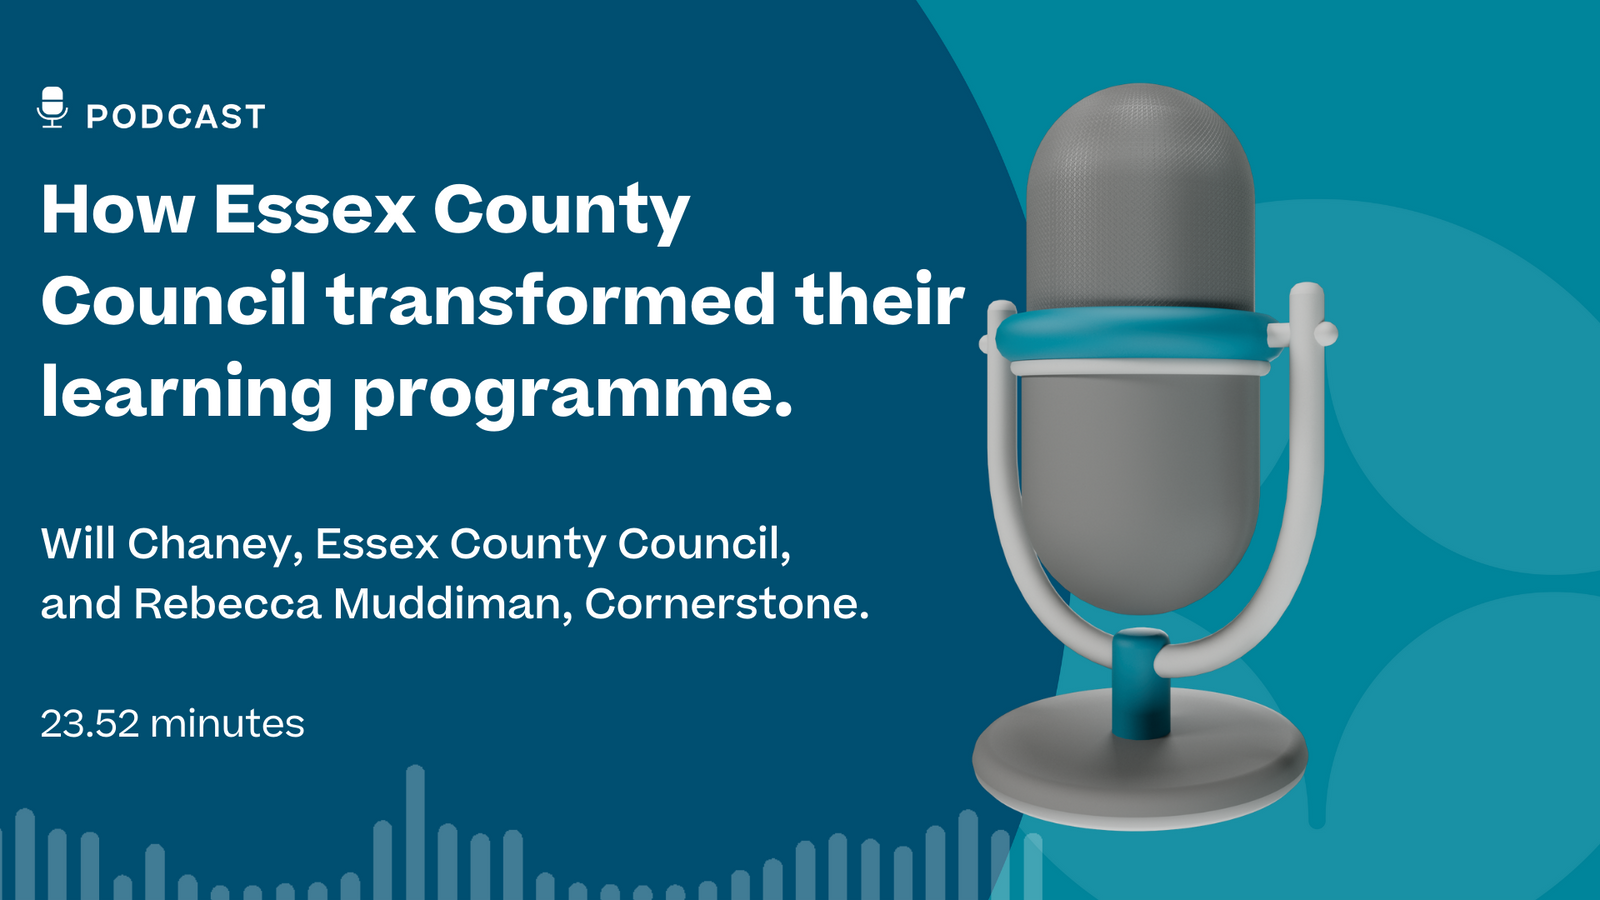 The power of learning: How Essex County Council transformed their learning programme